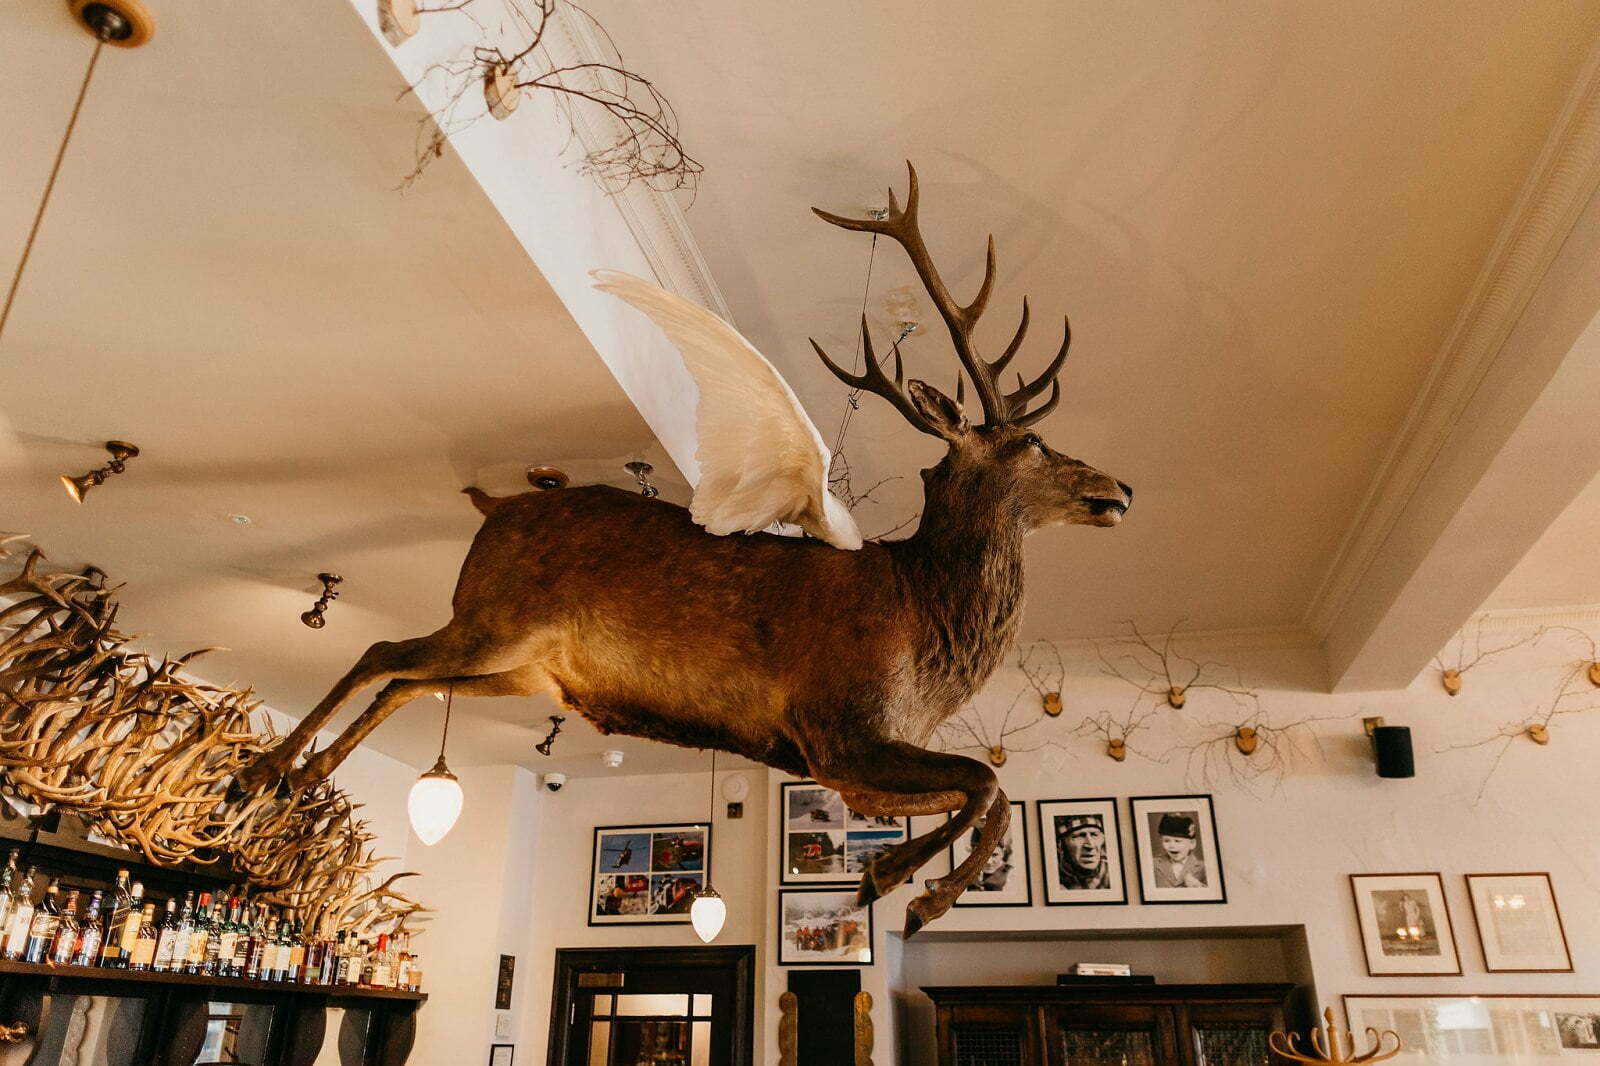 fife arms hotel braemar reception area luxury boutique hotel flying stag hanging from ceiling